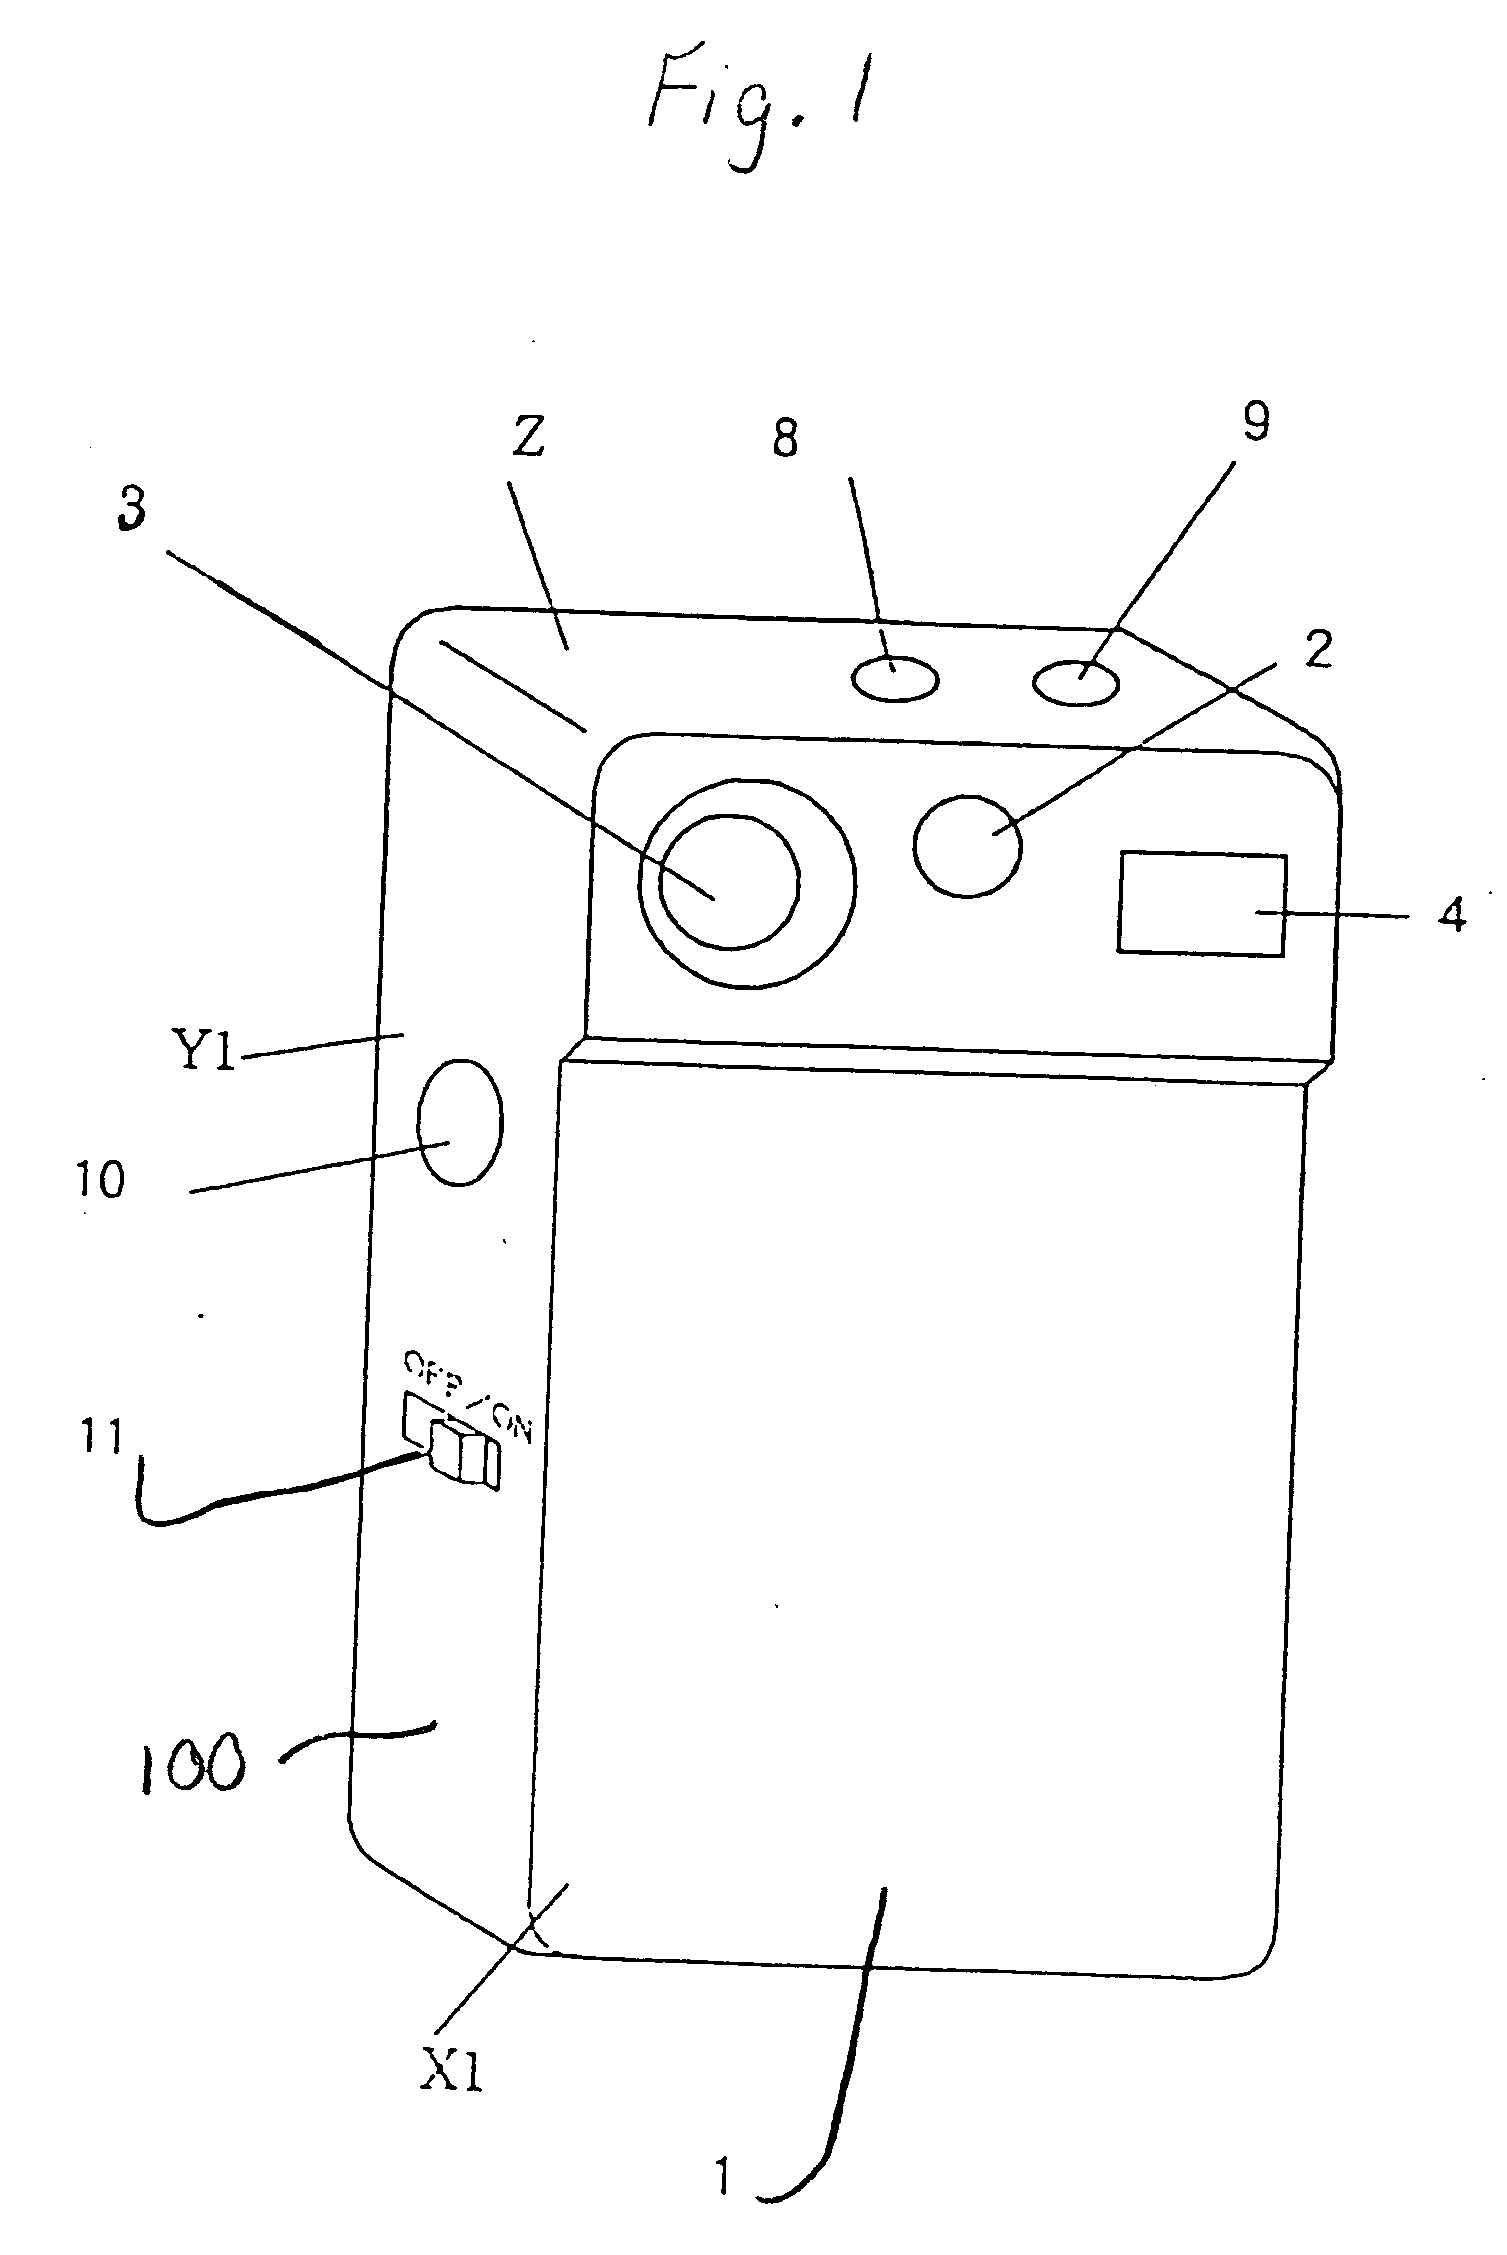 Information input apparatus having an integral touch tablet